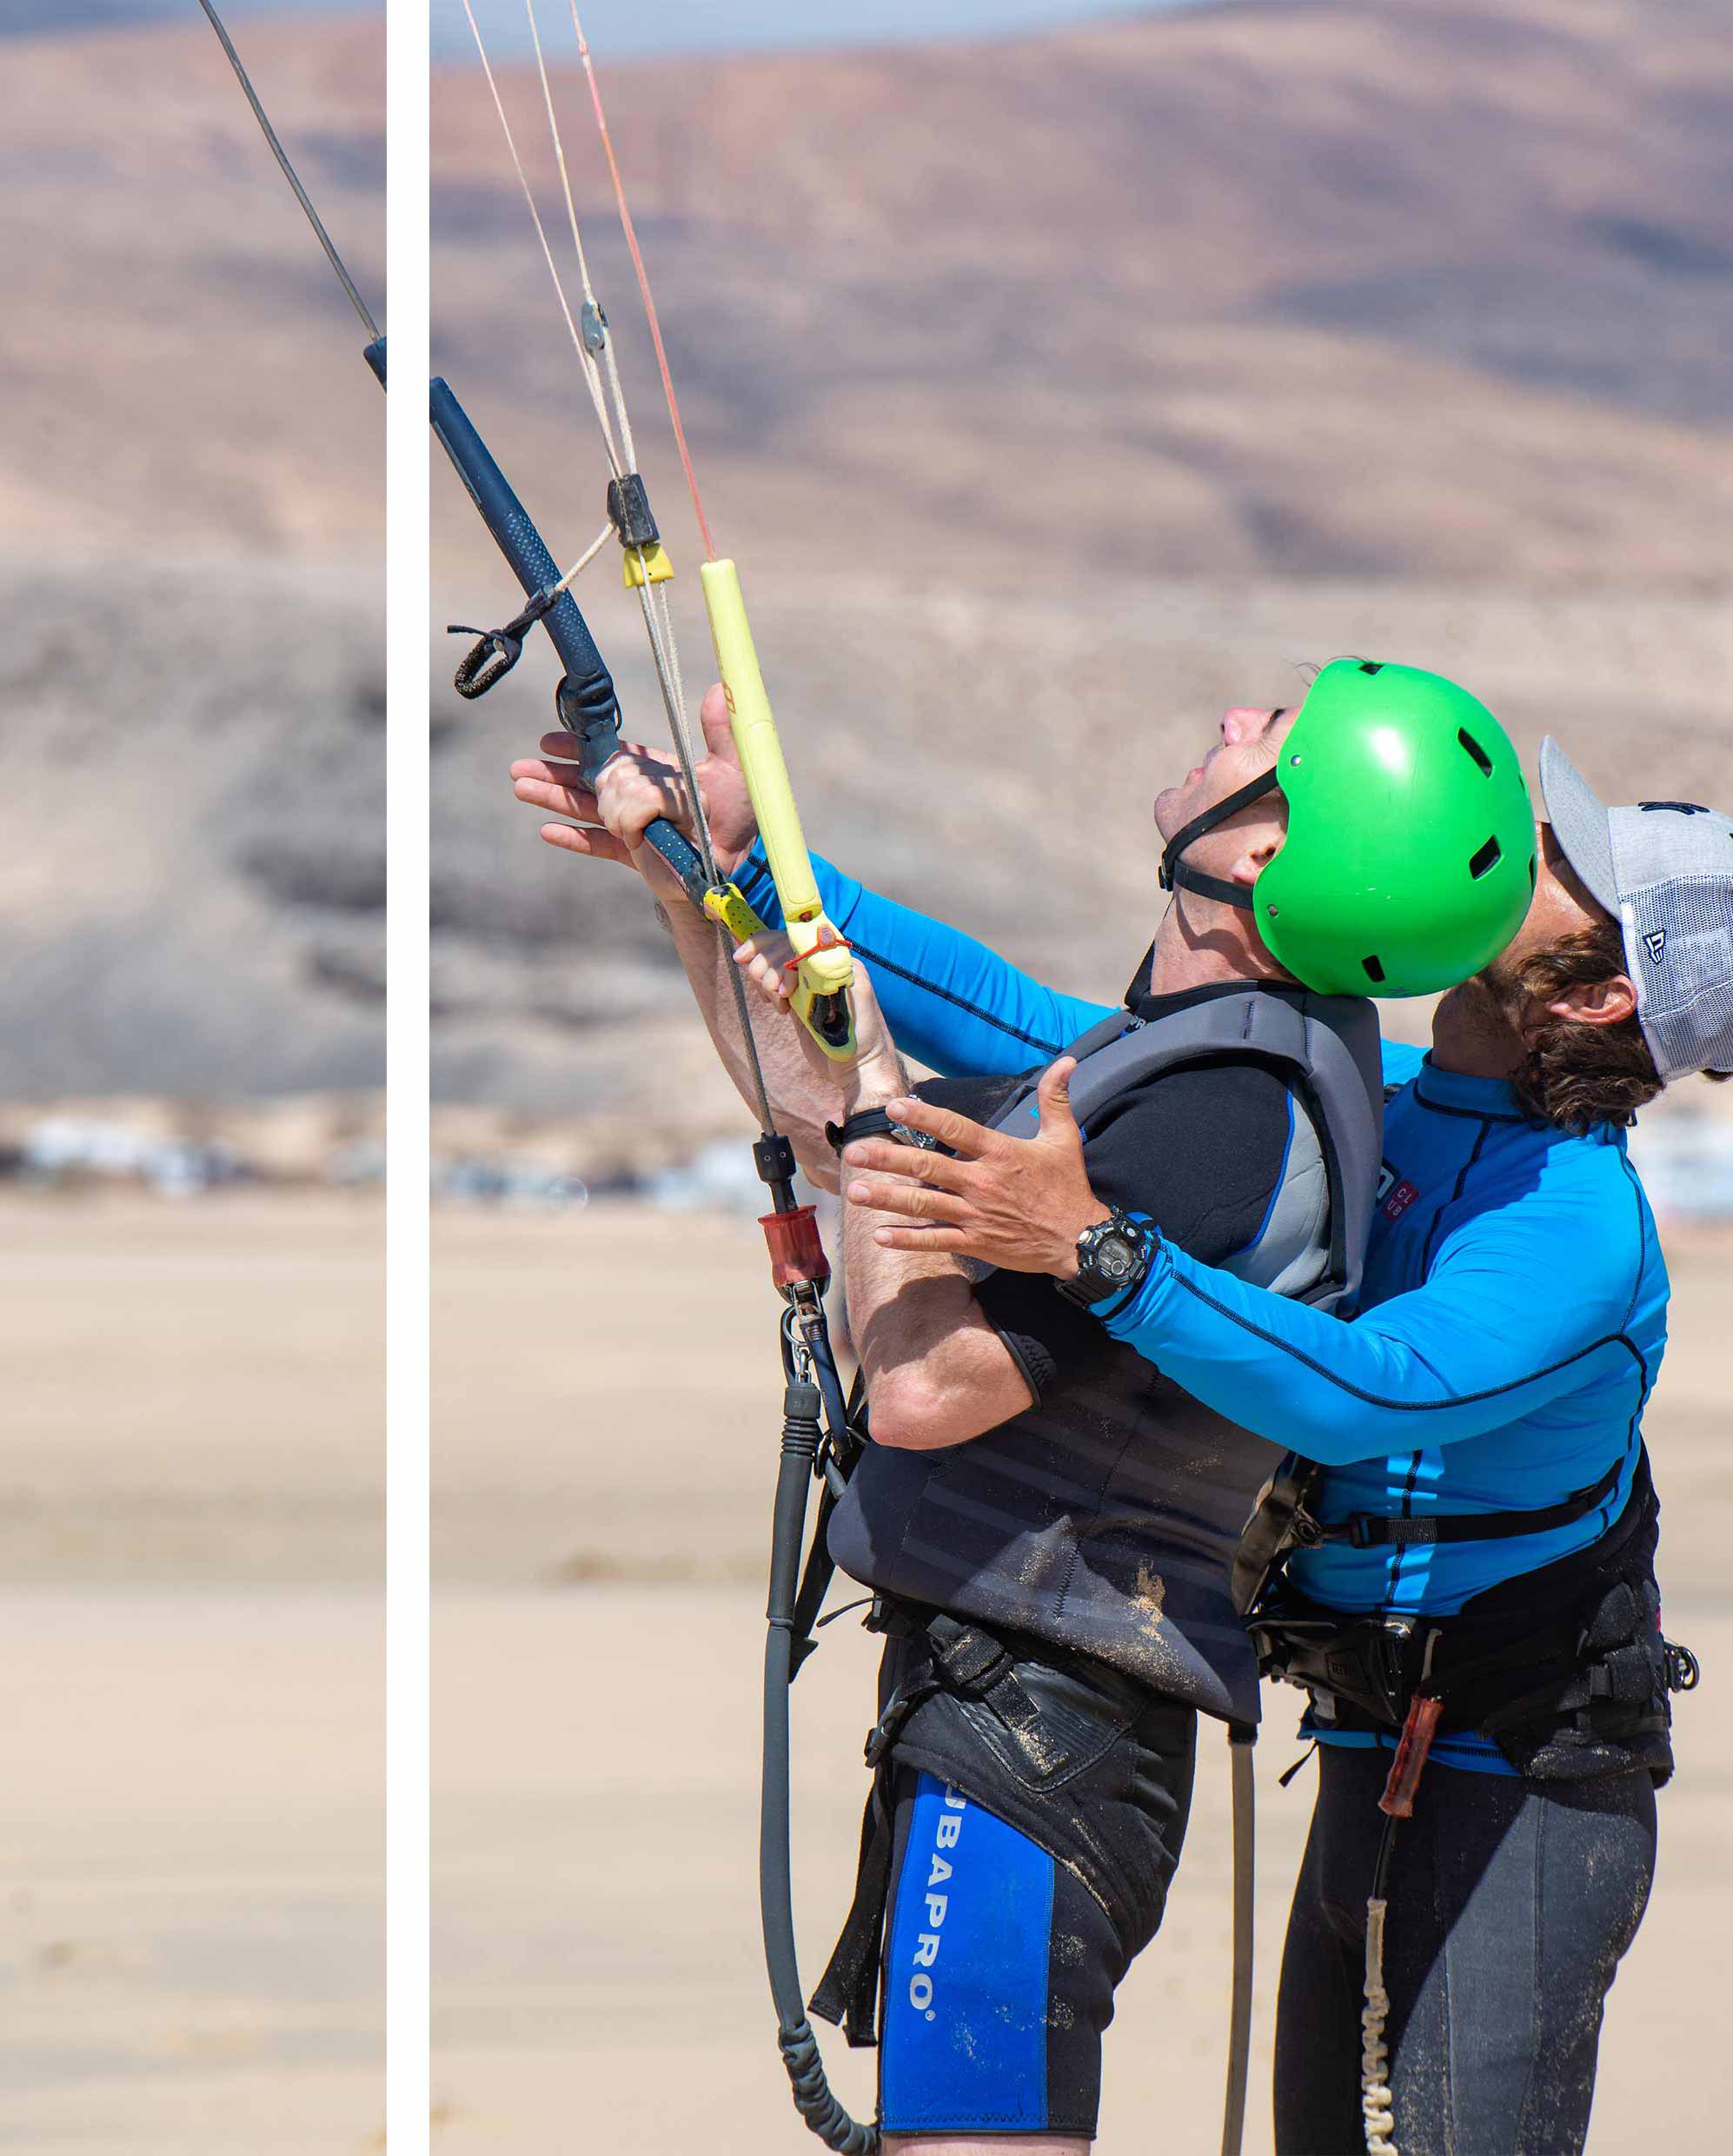 Kitesurfing instructor is teaching in a beginner course to handling the kite